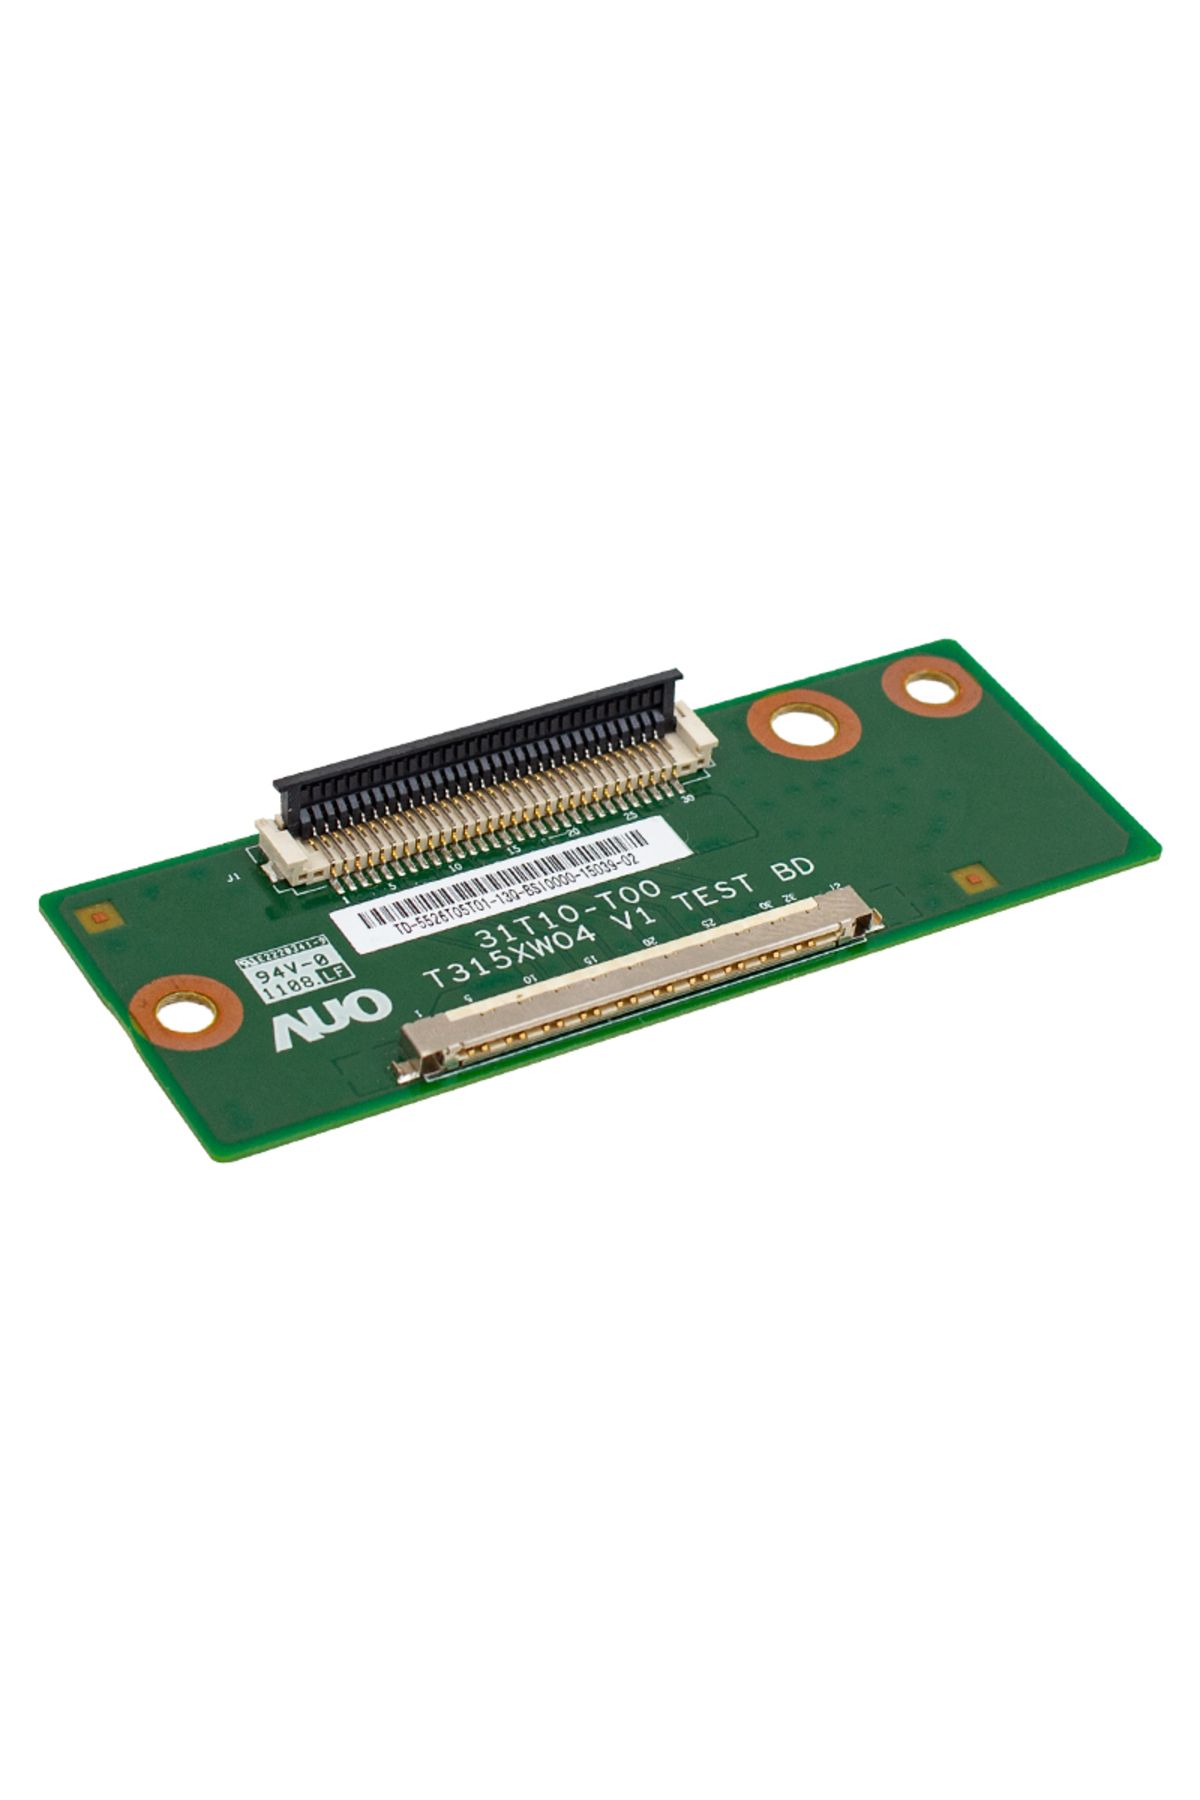 DİMA OFFİCİAL T-CON BOARD AUO 31T10-T00 T315XW04 V1 TEST BD